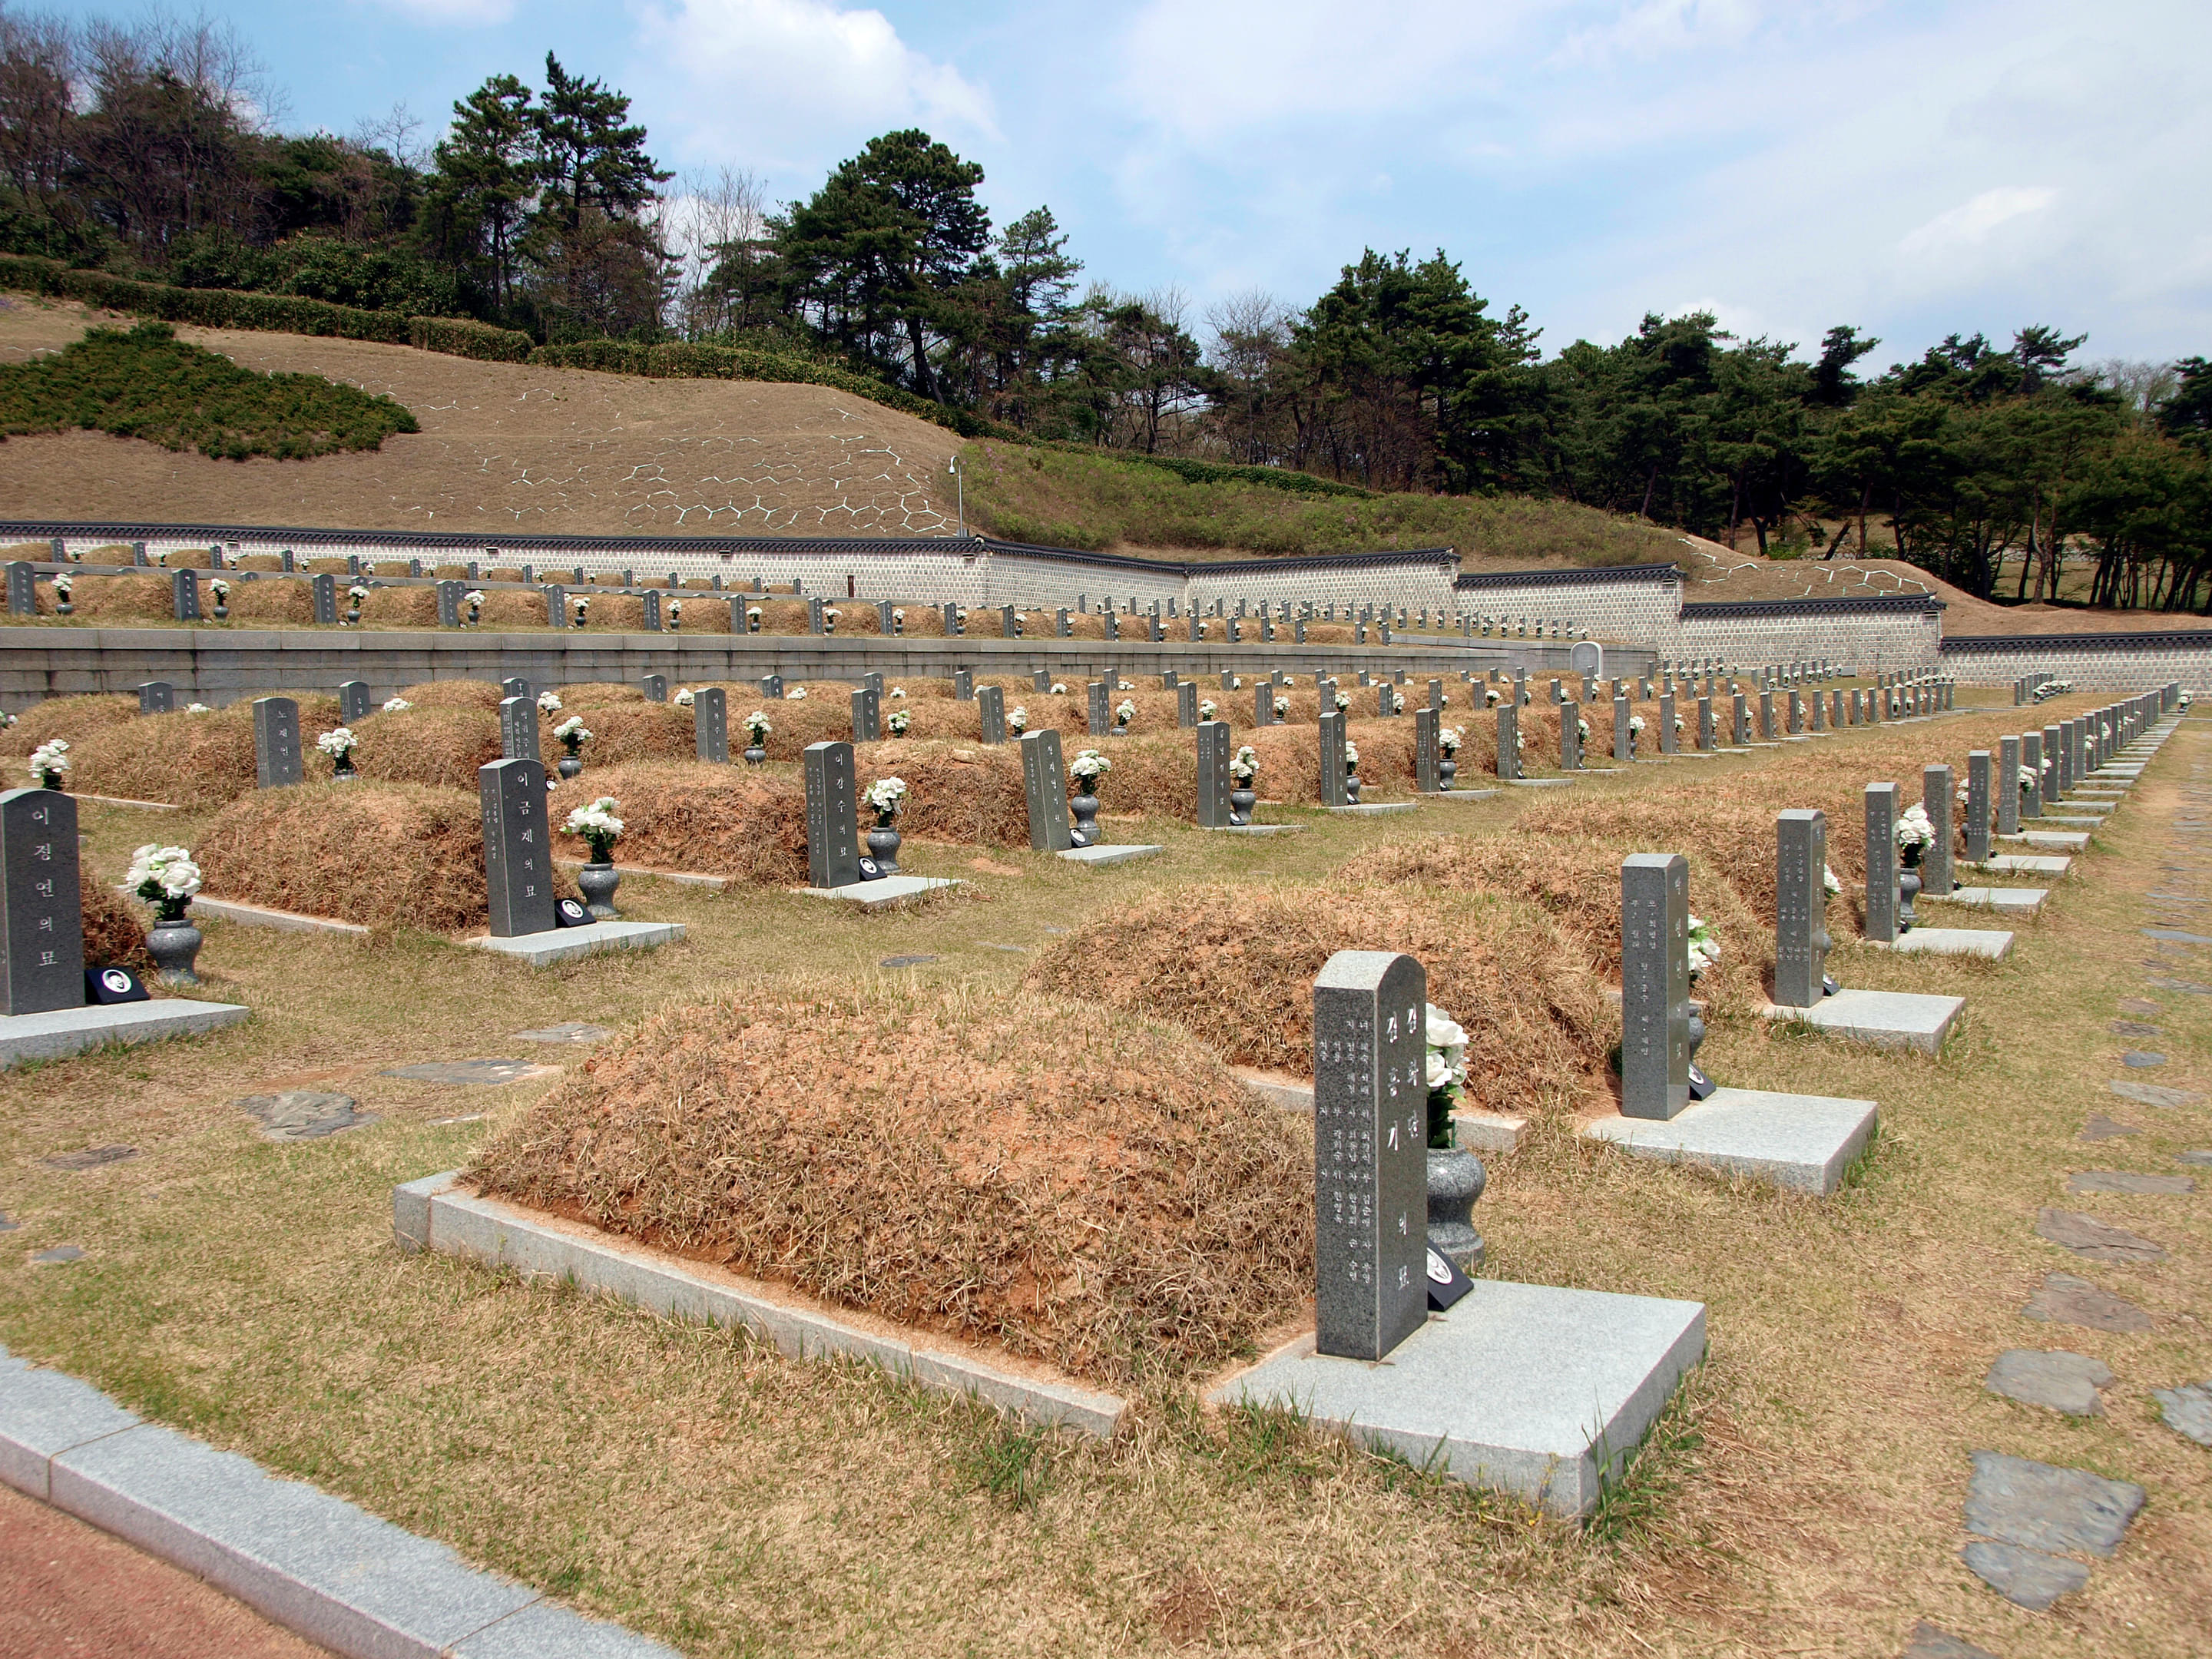 The May 18th National Cemetery, Gwangju Overview